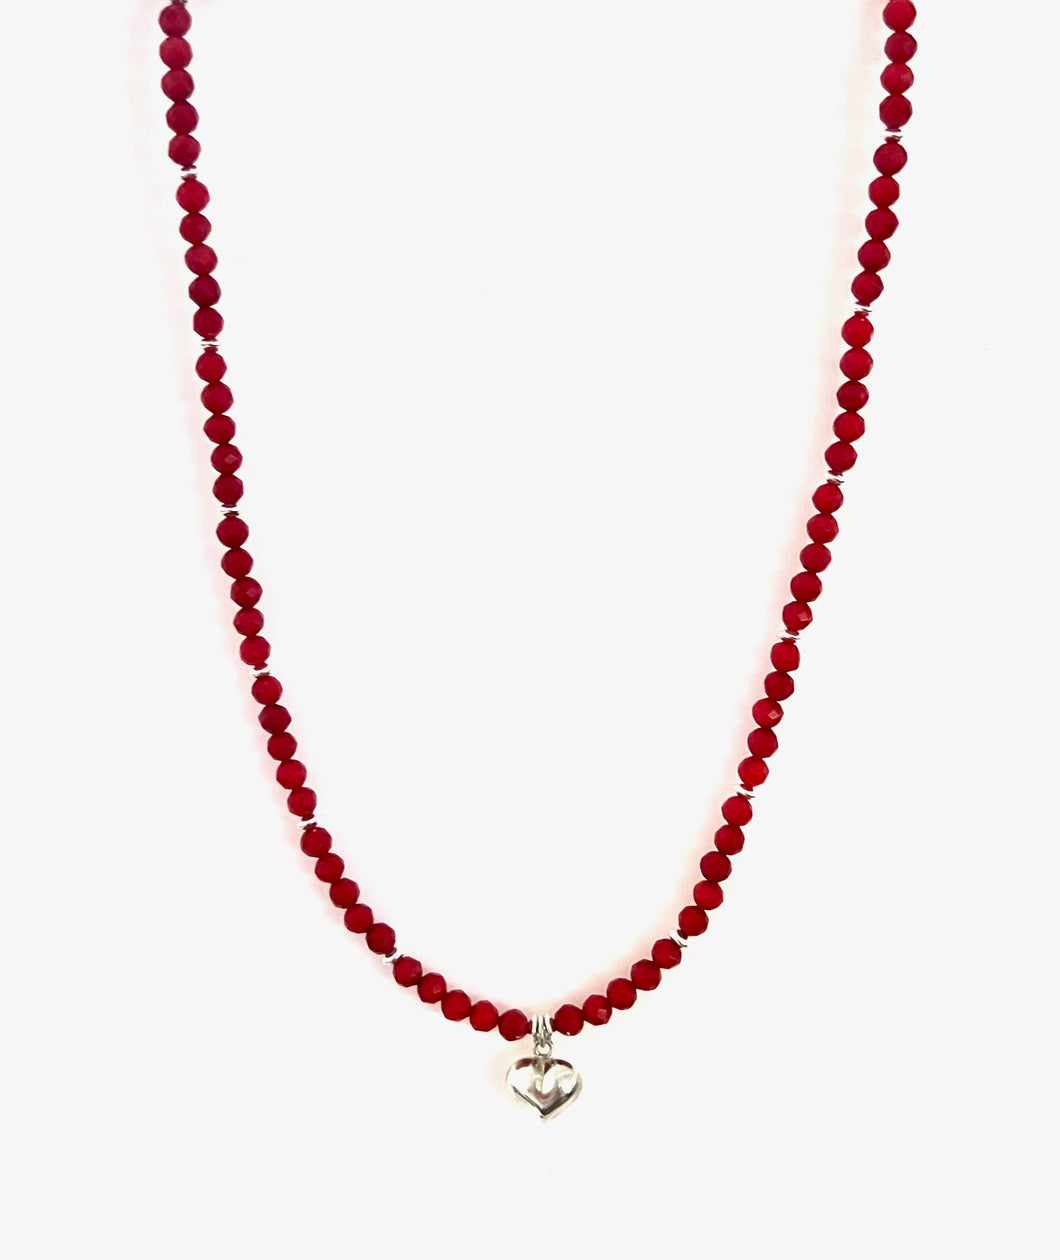 Australian Handmade Red Facetted Coral Bead Necklace with Sterling Silver Heart